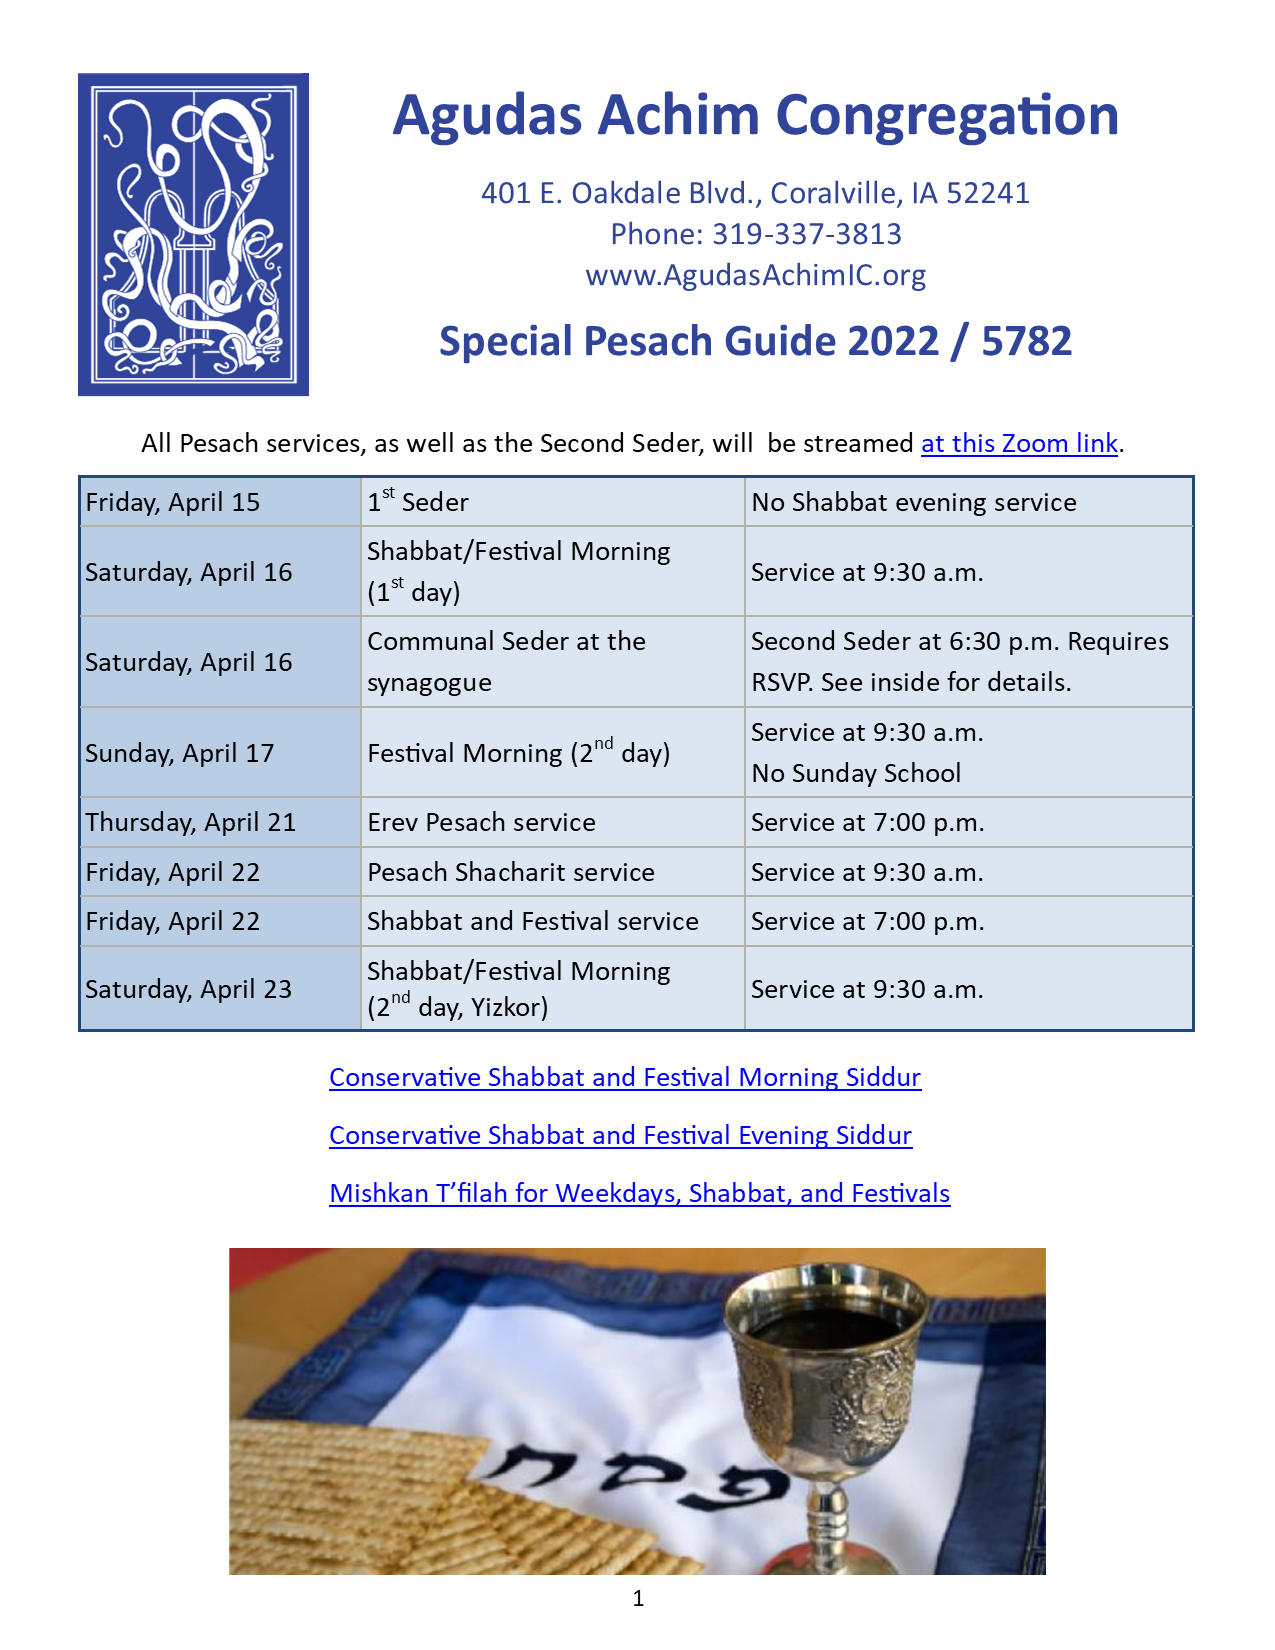 2022 Special Pesach Guide Cover